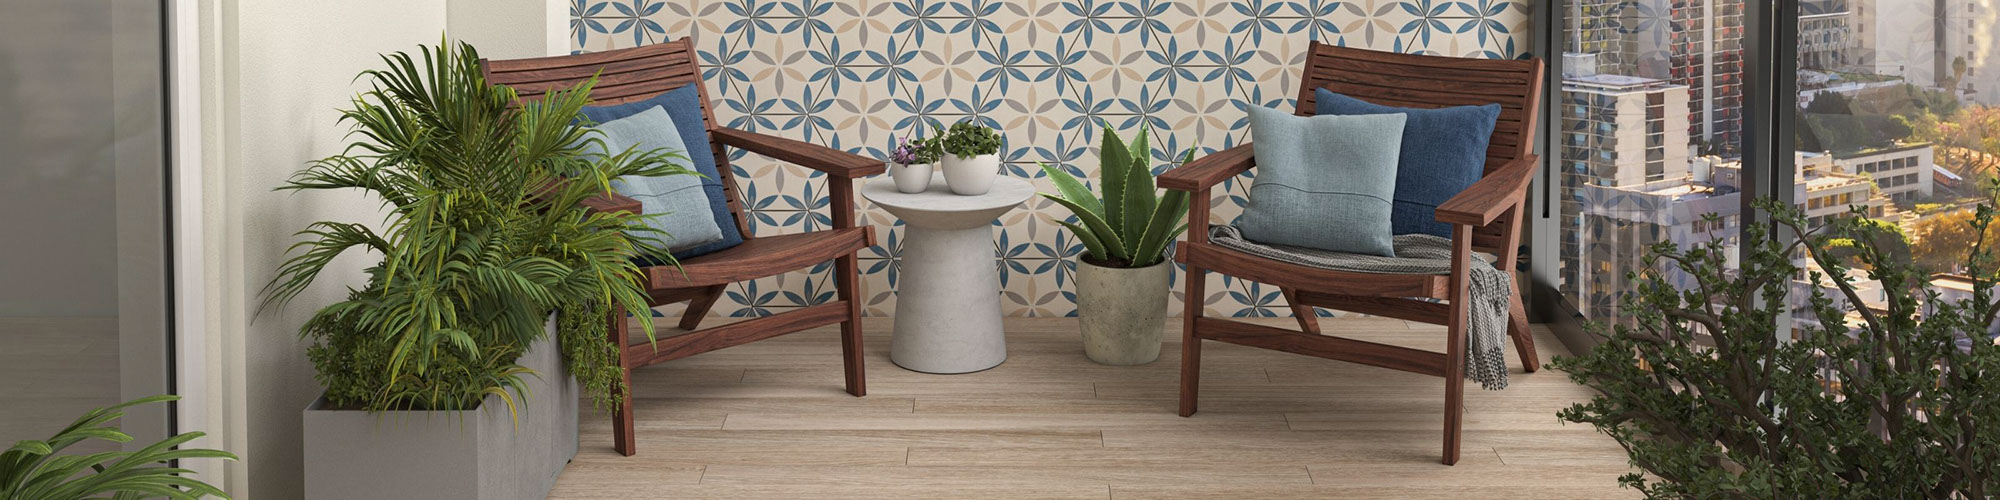 Highrise patio with wood look tile flooring, feature wall with blue & beige decorative wall tile, several potted plants, and wicker chairs around a small table.